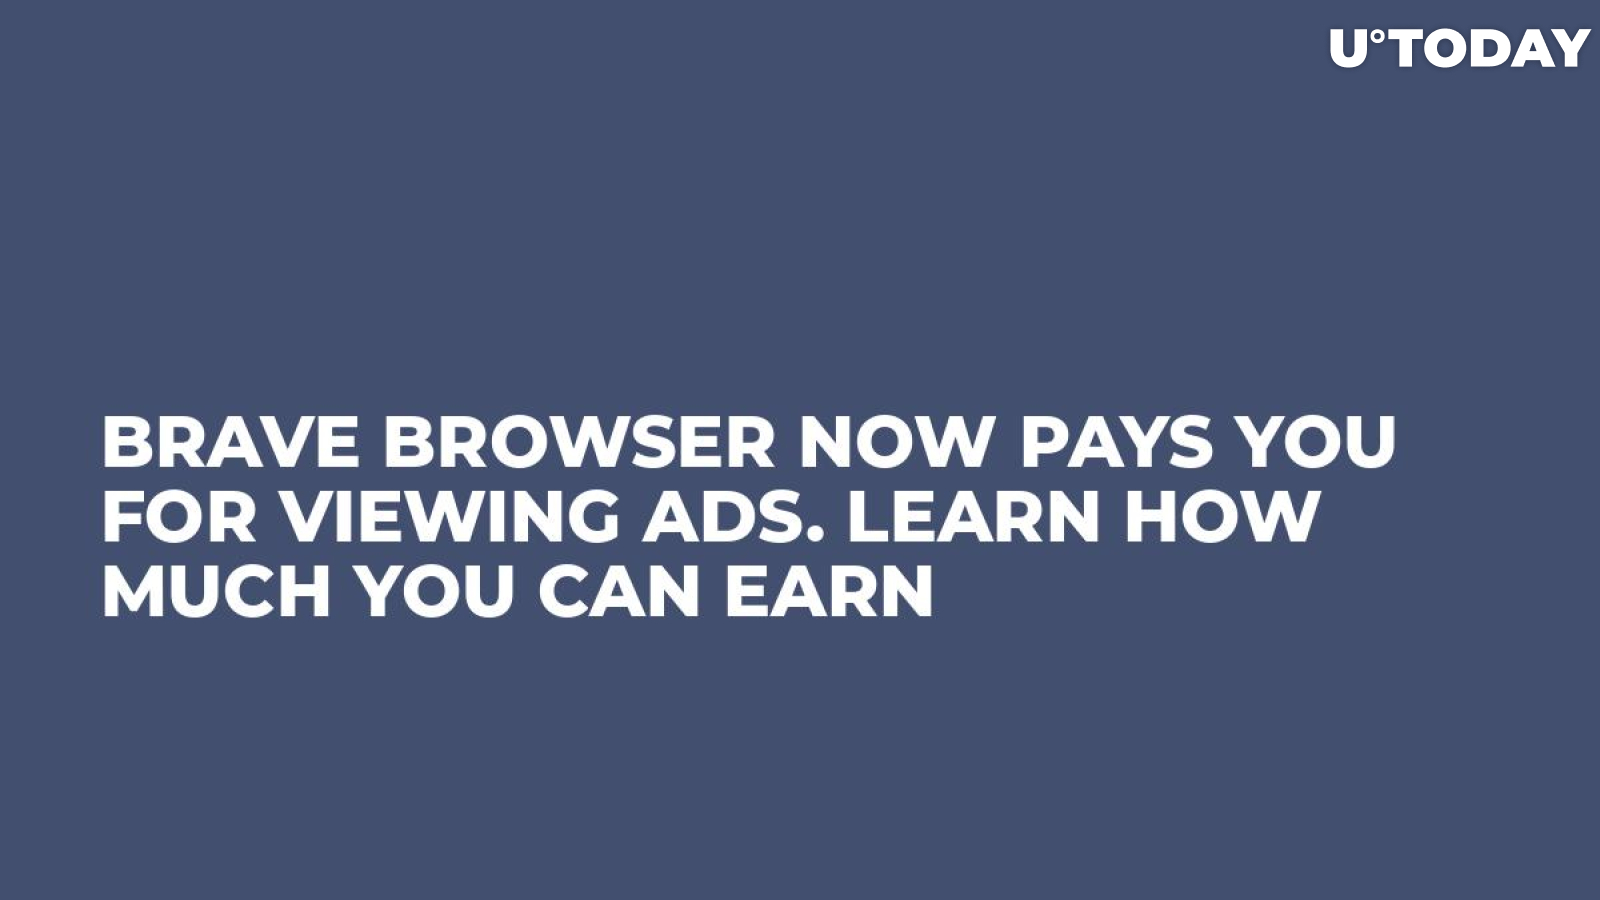 Brave Browser Now Pays You for Viewing Ads. Learn How Much You Can Earn